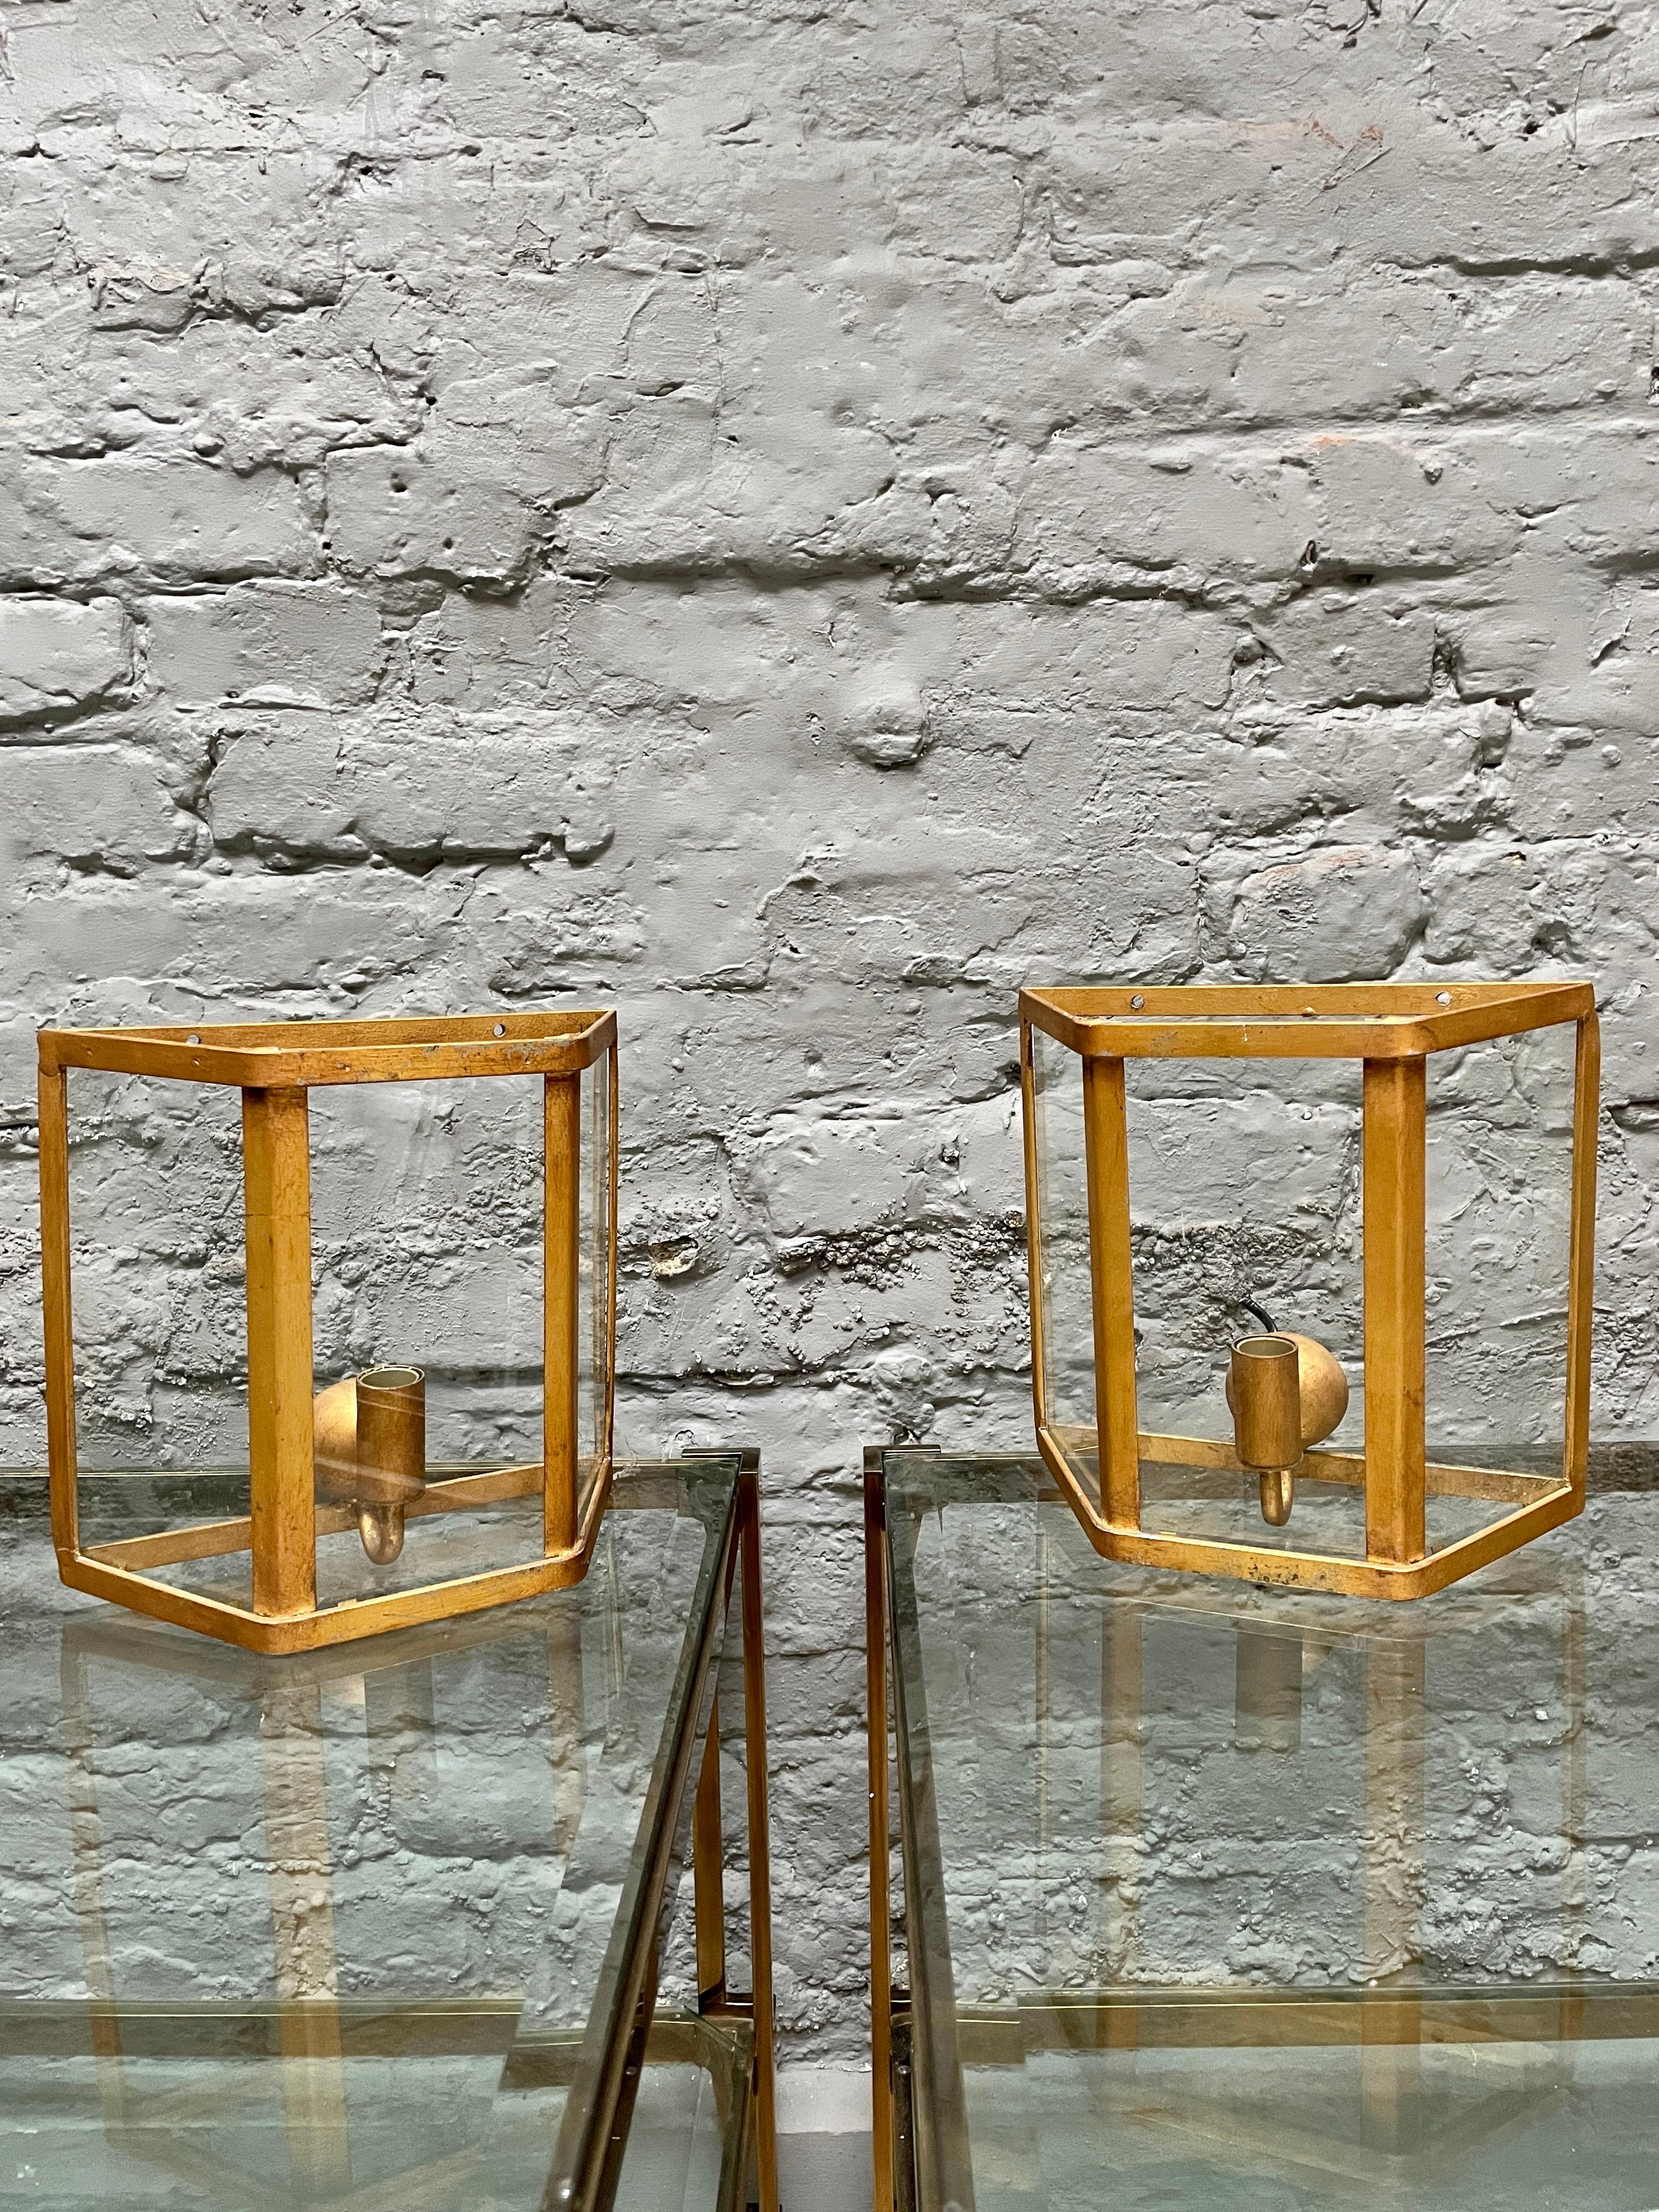 A run of 8 gold gilt iron wall lights, with 3 glass panels and open top and bottom. One light fitting within. Apparently bespoke made for an apartment in Amsterdam.
Imported from Holland.

Circa 1990.